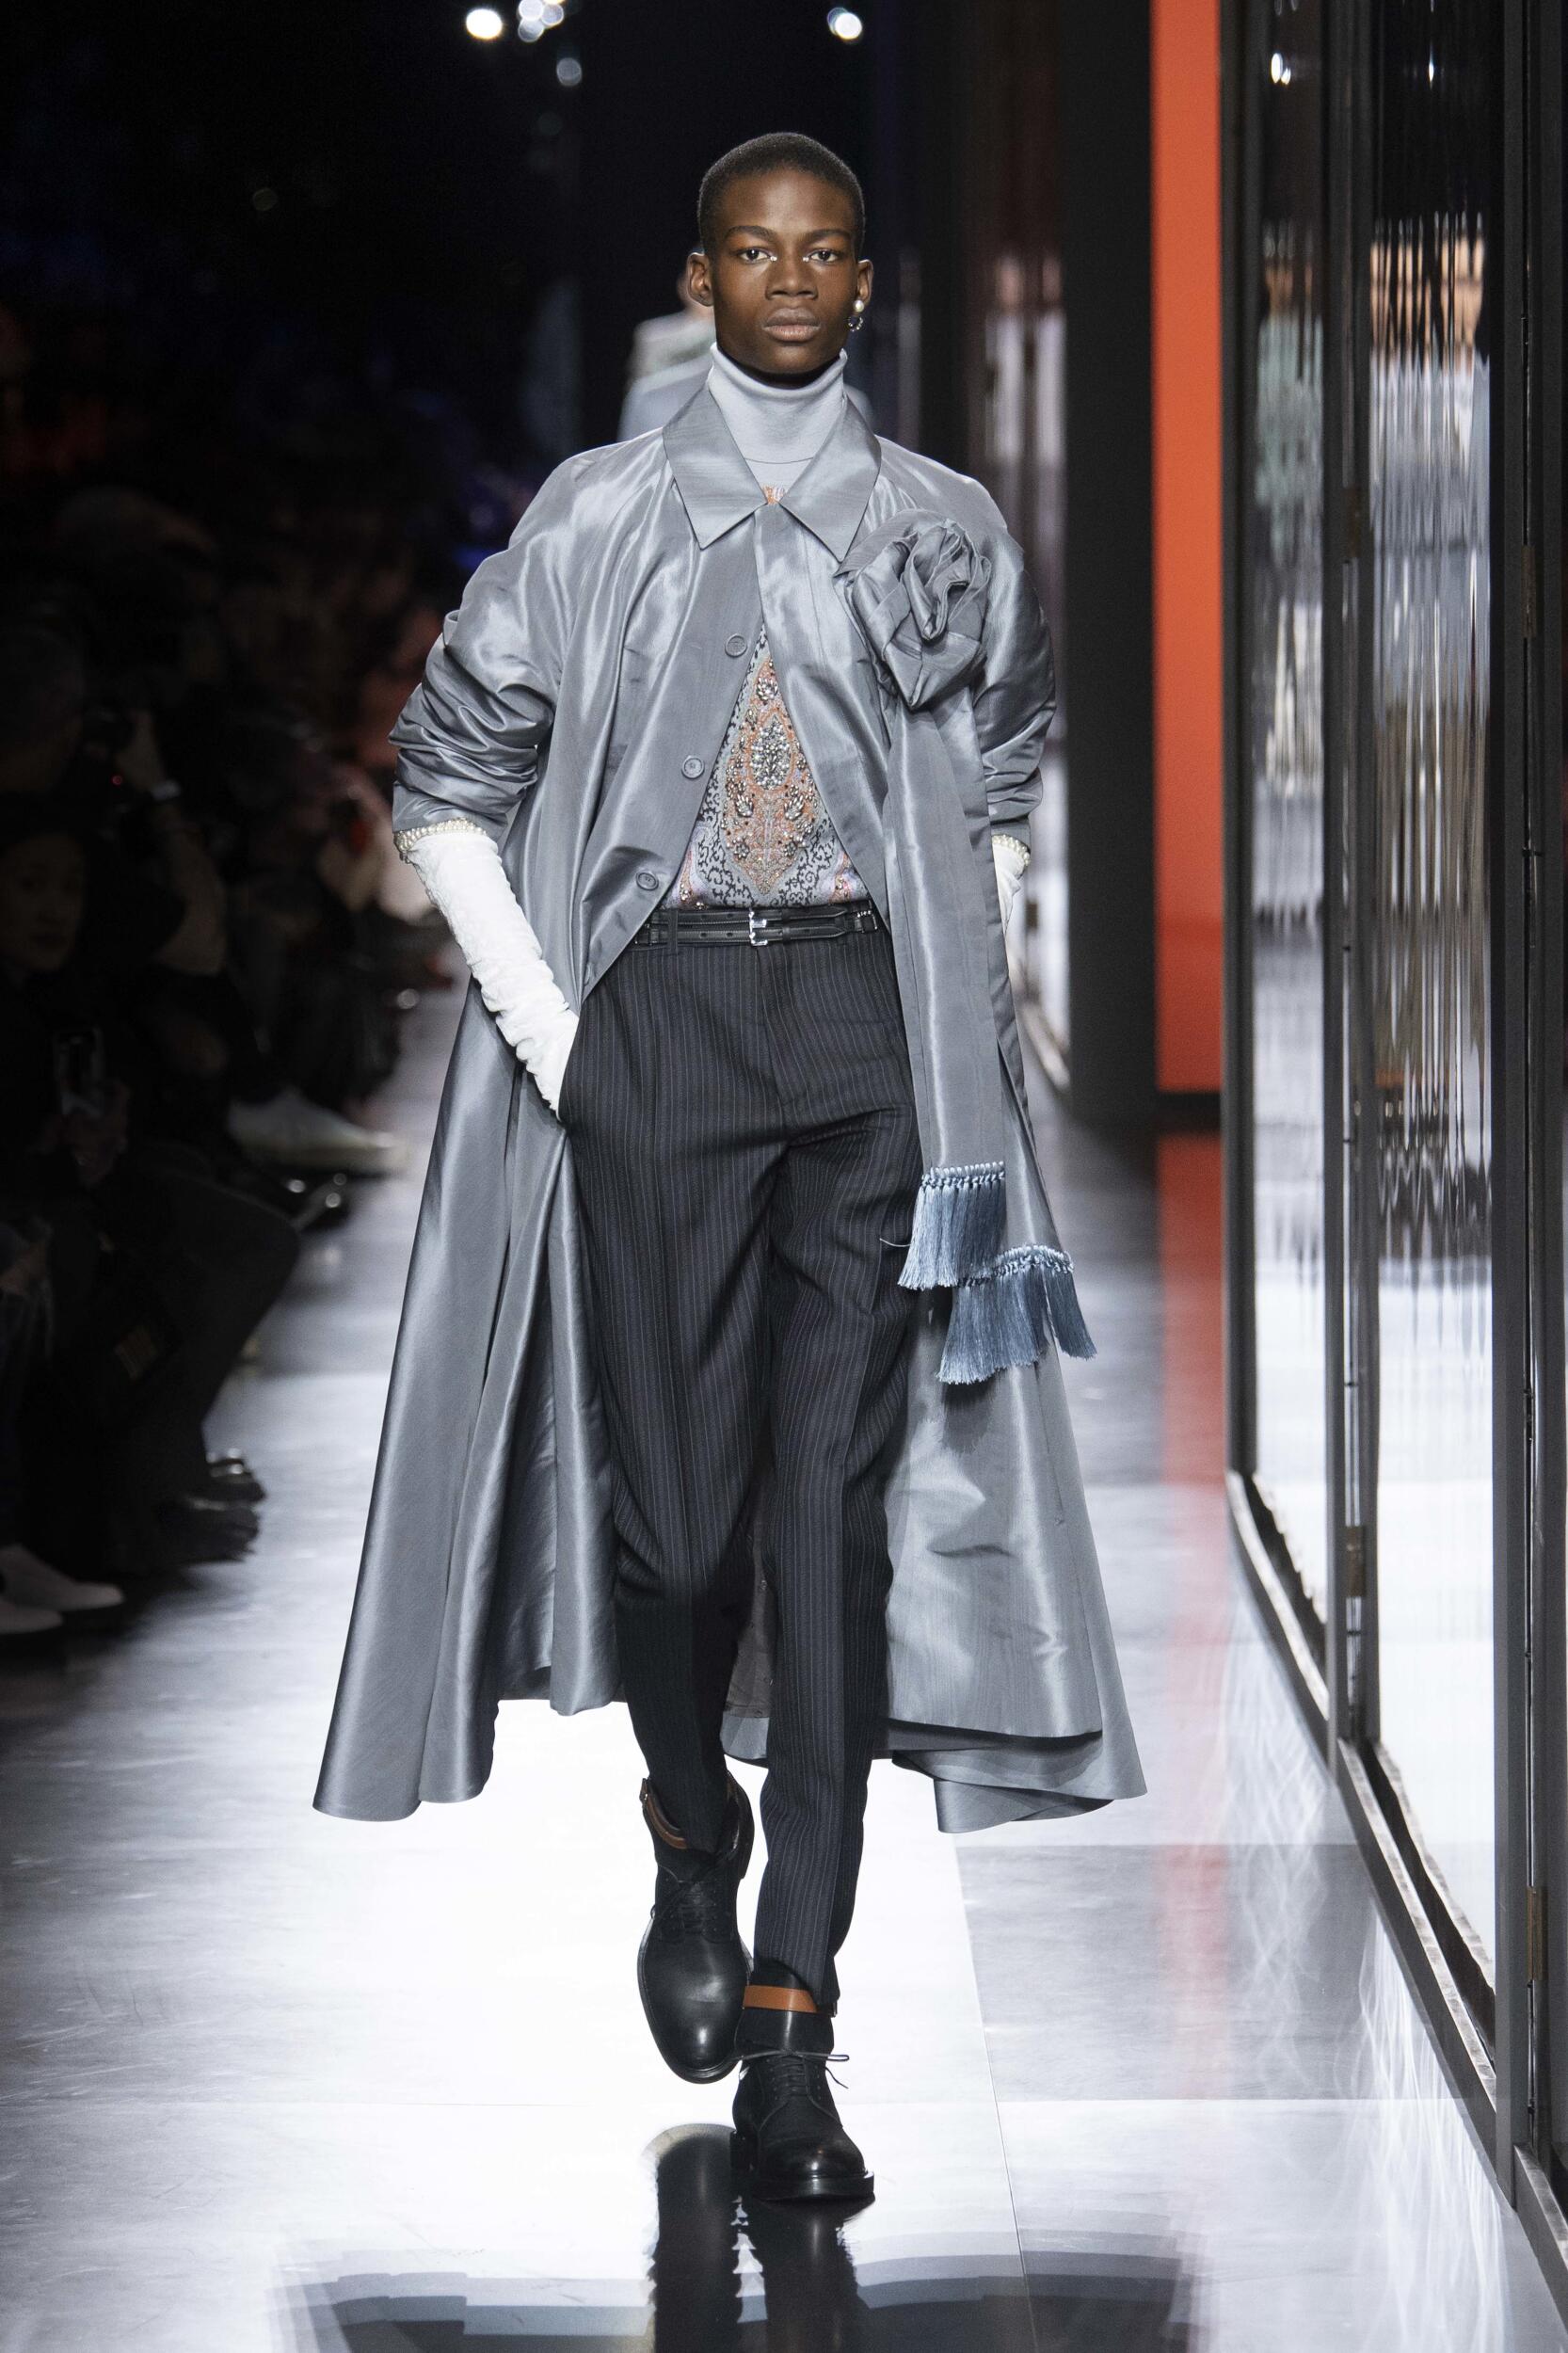 DIOR FALL WINTER 2020 MENS COLLECTION  The Skinny Beep